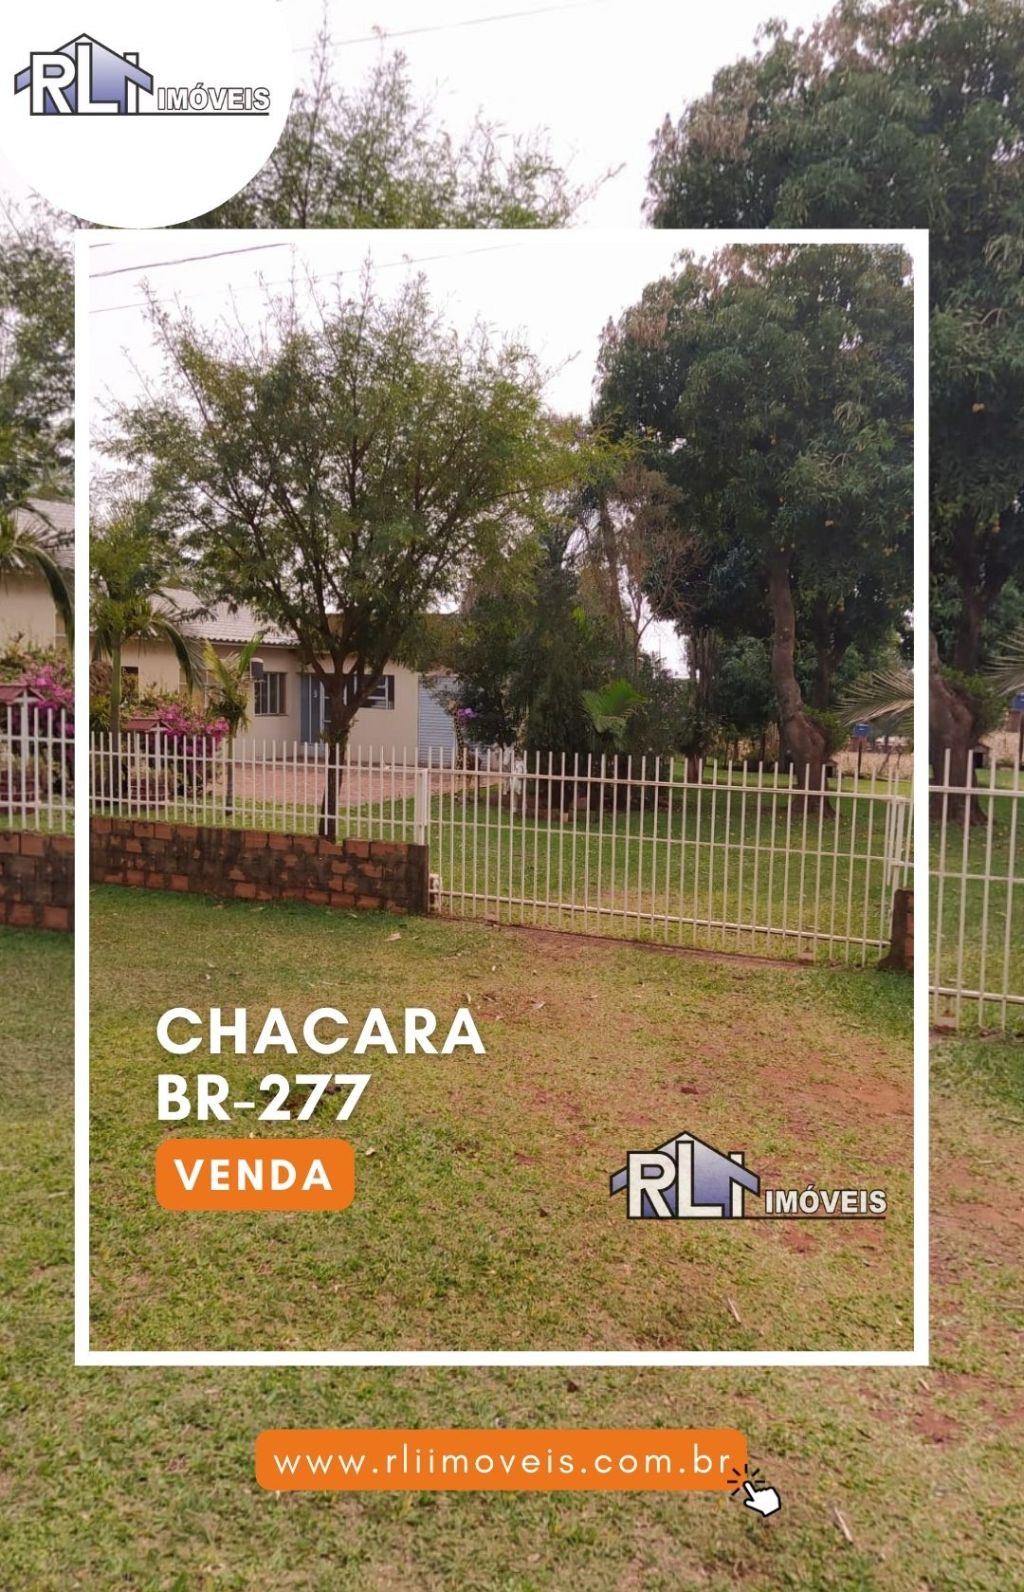 CHACARA BR-277